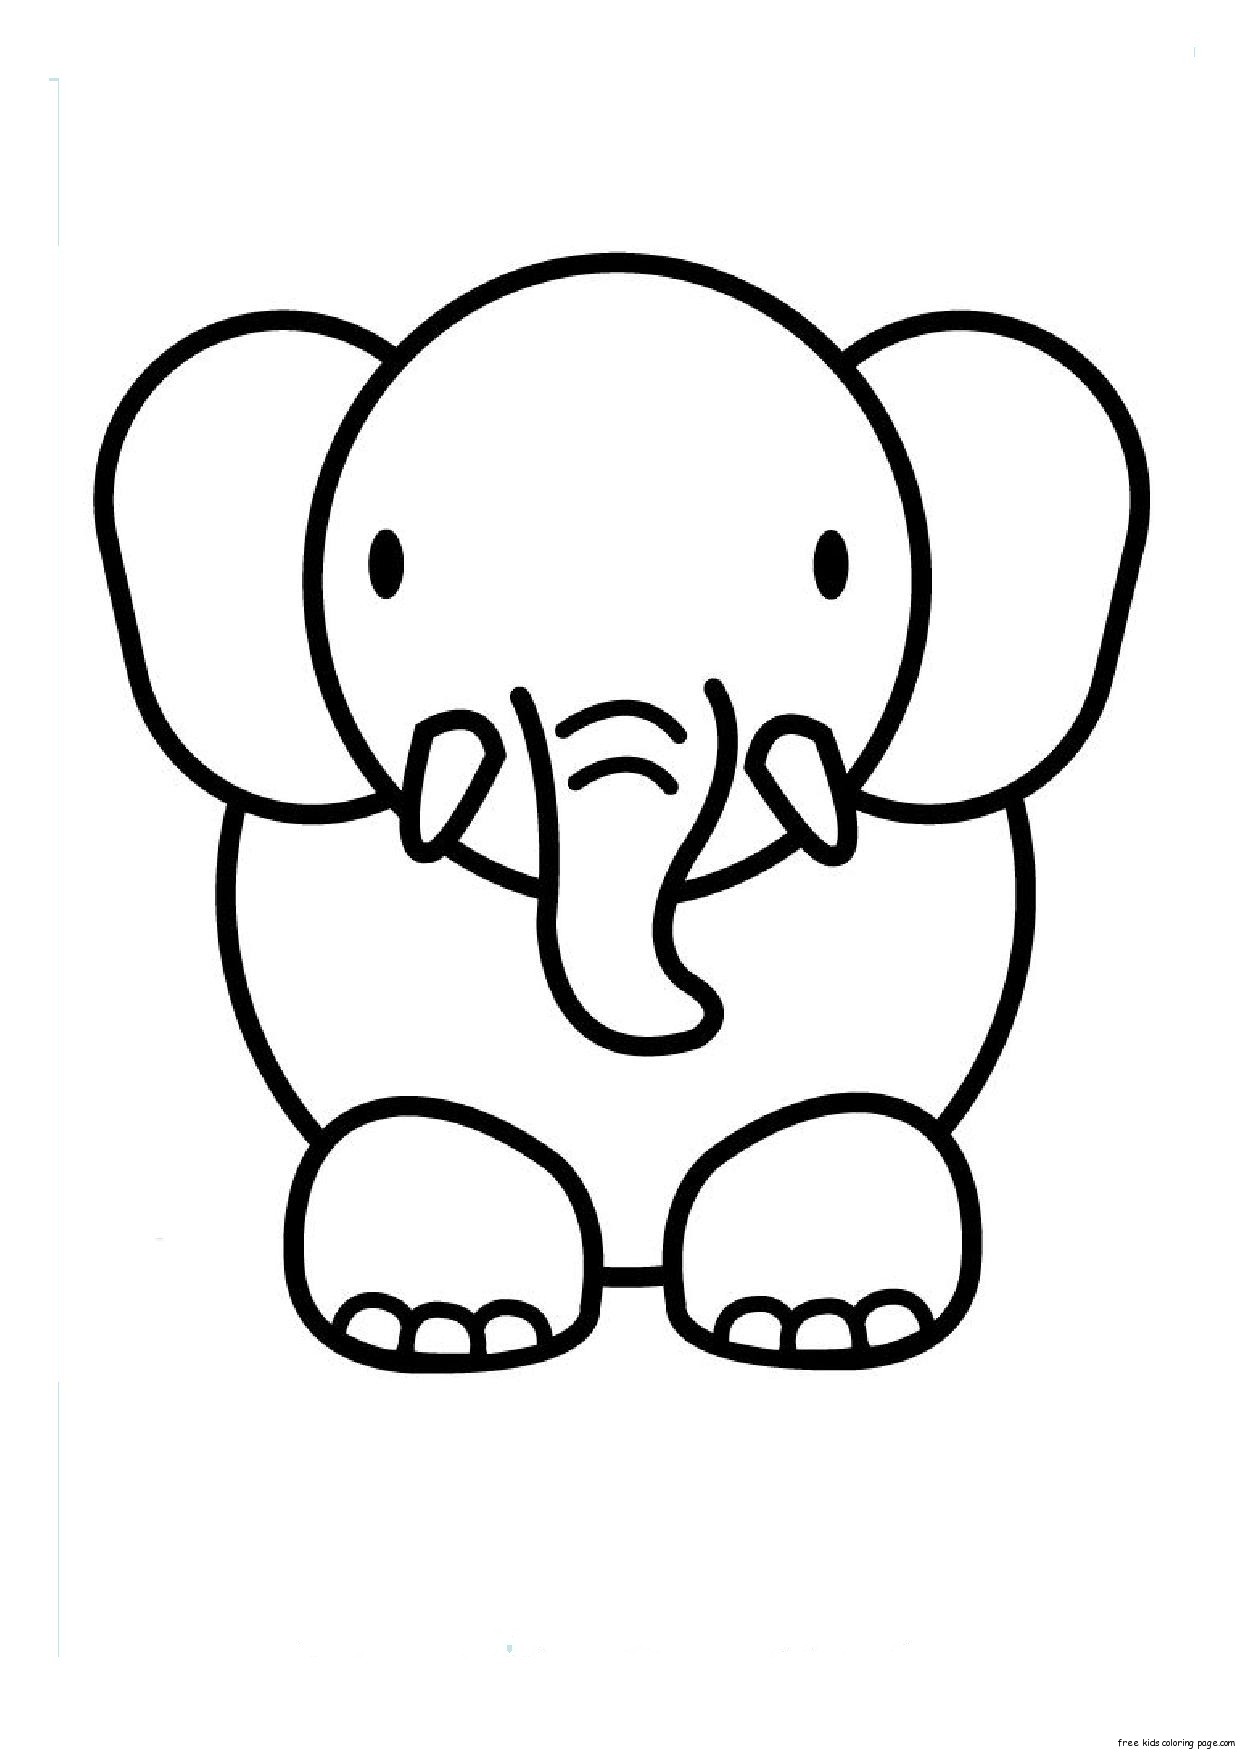 Elephant Printable Pictures - ClipArt Best